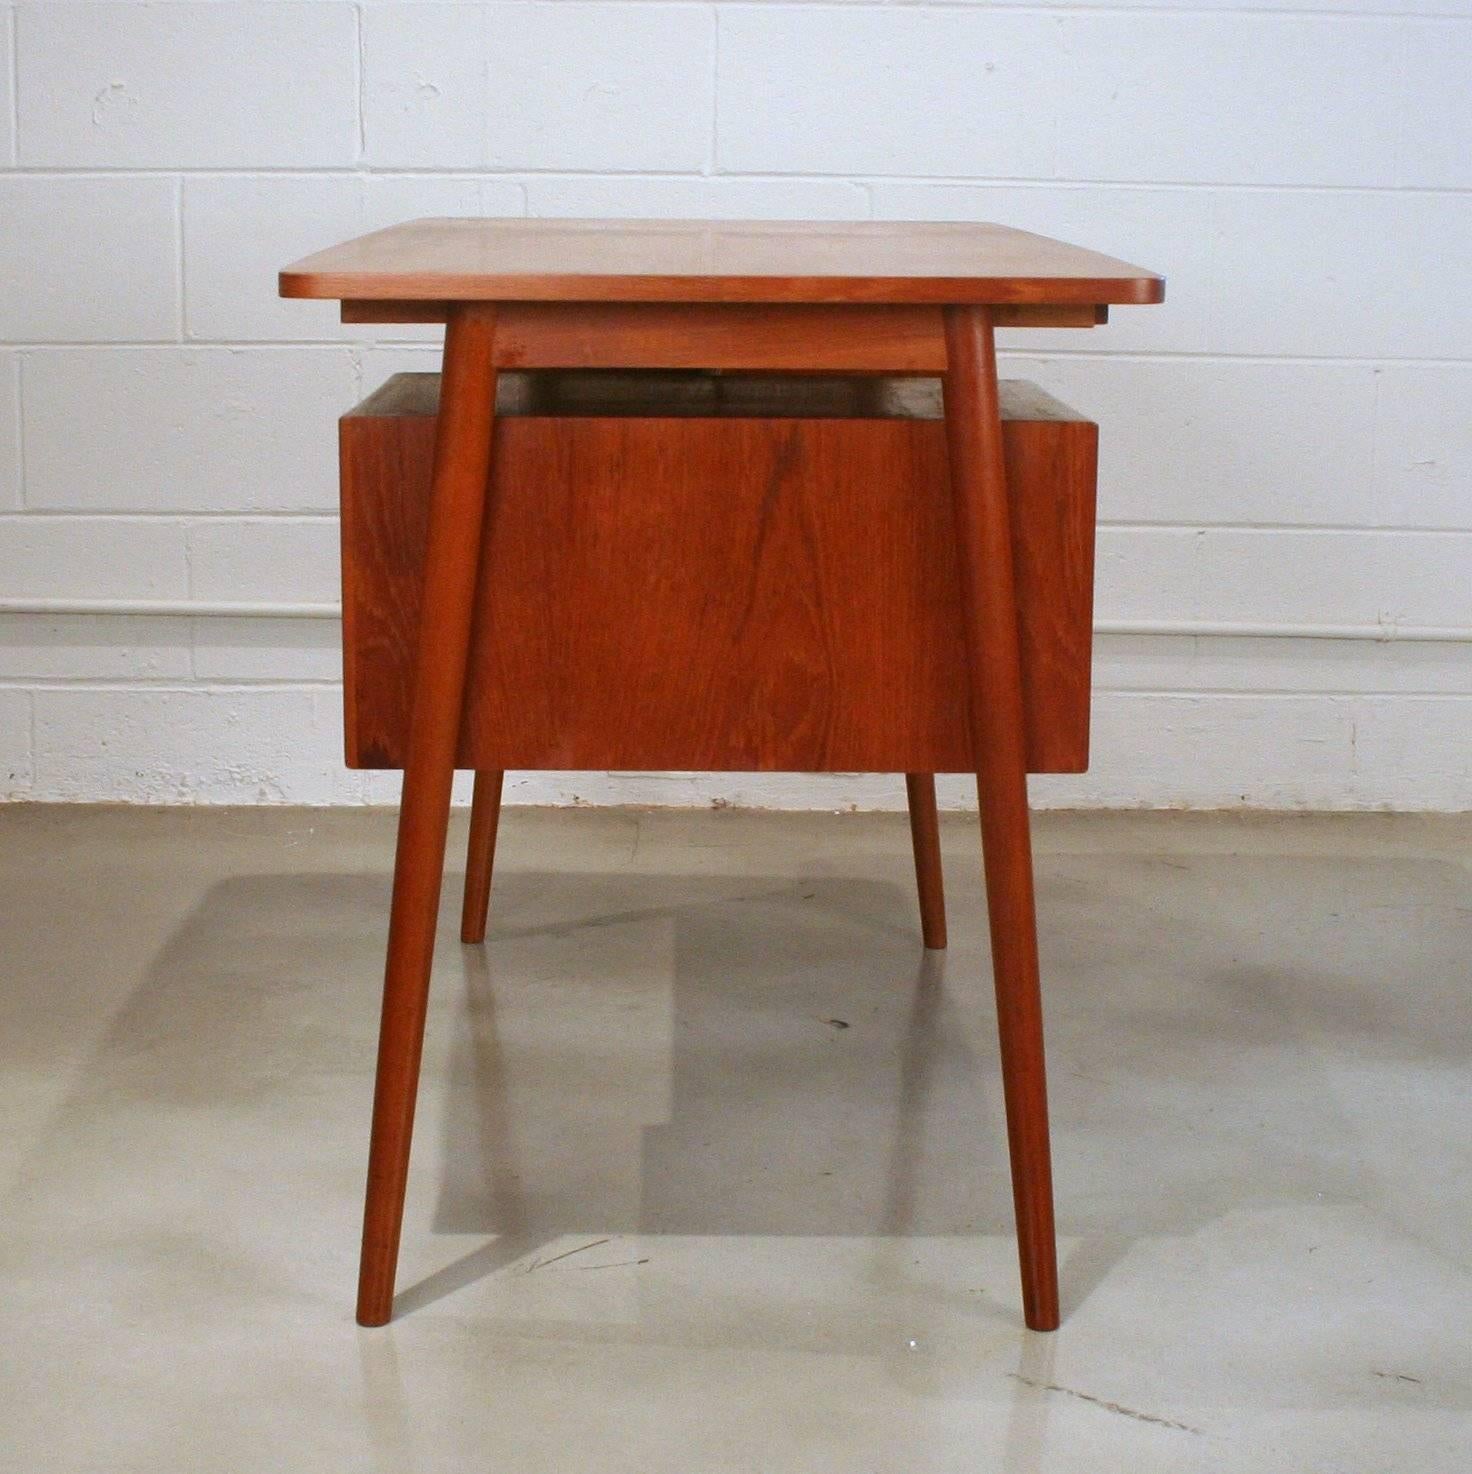 Small-scale vintage Danish teak writing desk with single bank of drawers and small storage shelf. Drawers feature solid teak half-moon pulls. Rear has an open storage shelf. Resting on solid conical angled legs. Made in Denmark.